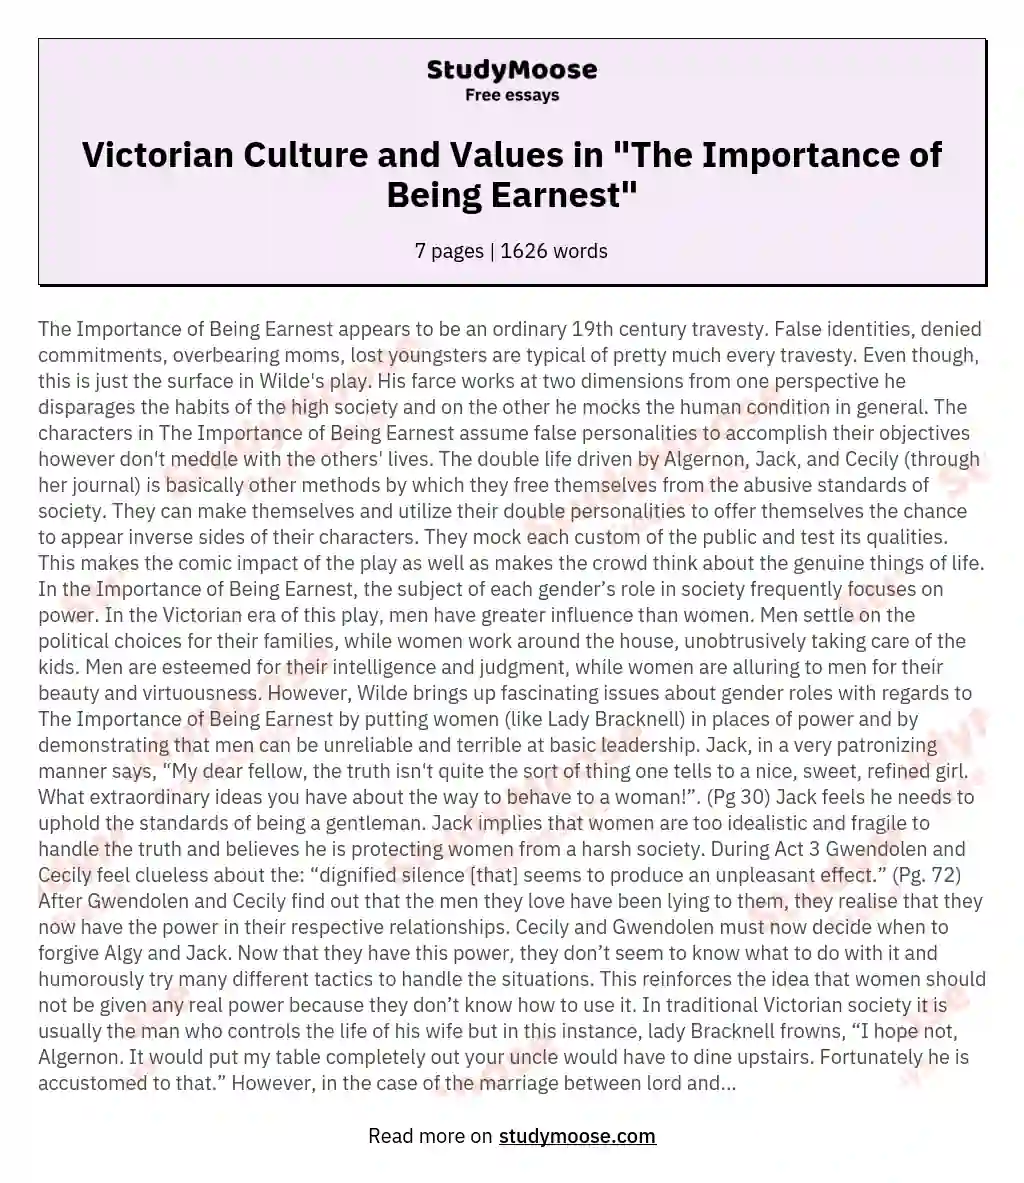 Victorian Culture and Values in "The Importance of Being Earnest"